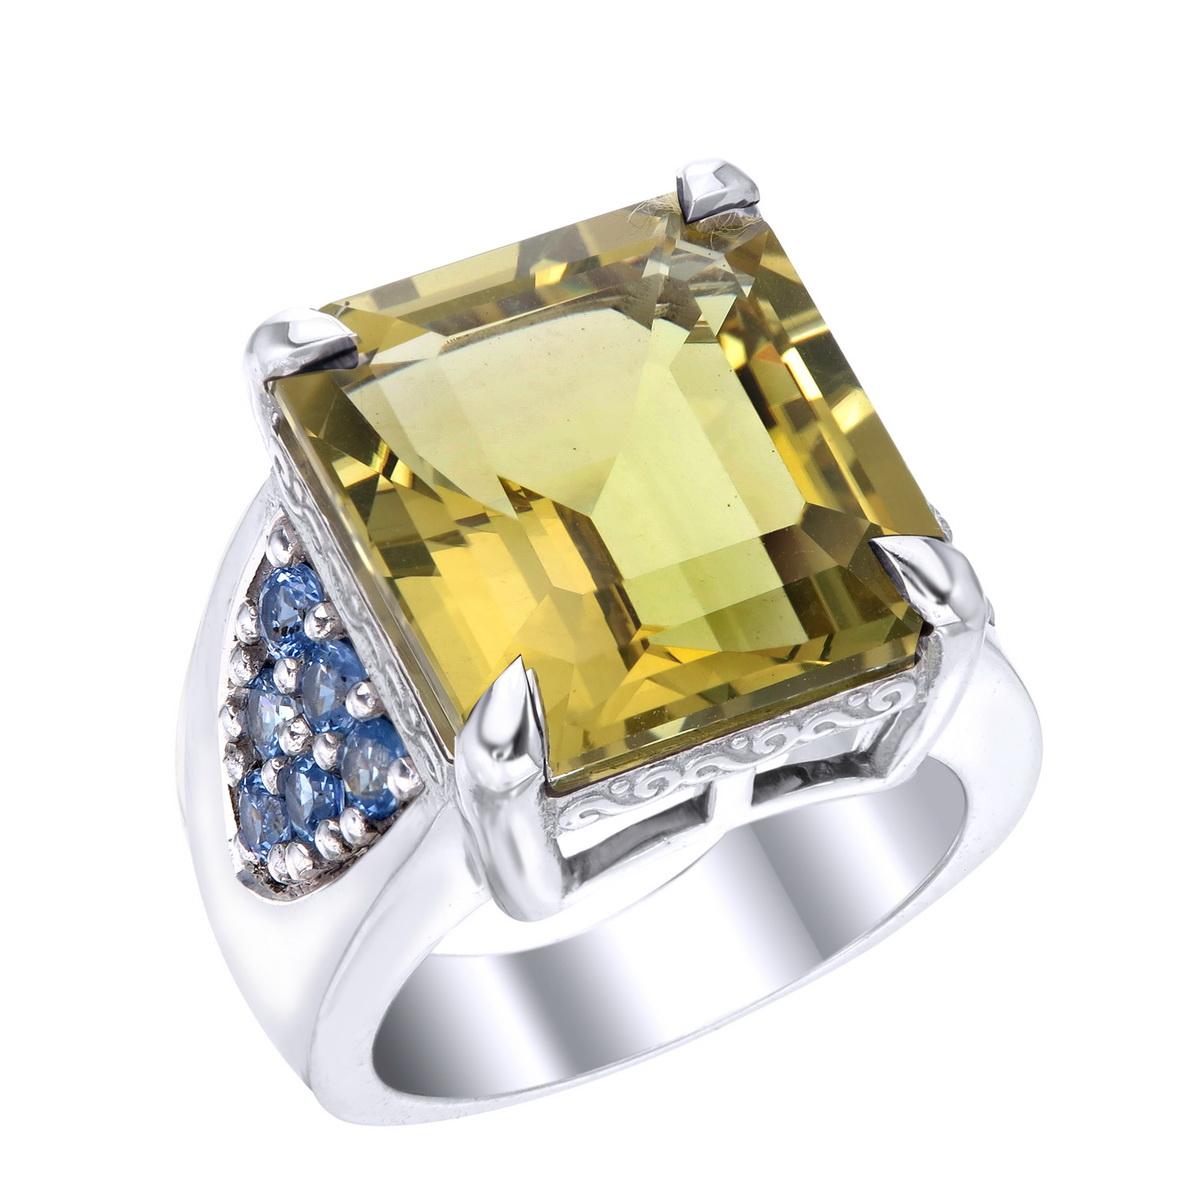 Orloff of Denmark; 15.16 carat Lemon Quartz Sterling Silver Ring set with twelve Blue Sapphires.

This piece has been fashioned out of 925 sterling silver, and features a 15 carat lemon quartz gem held by a claw setting of four sharp prongs.
With